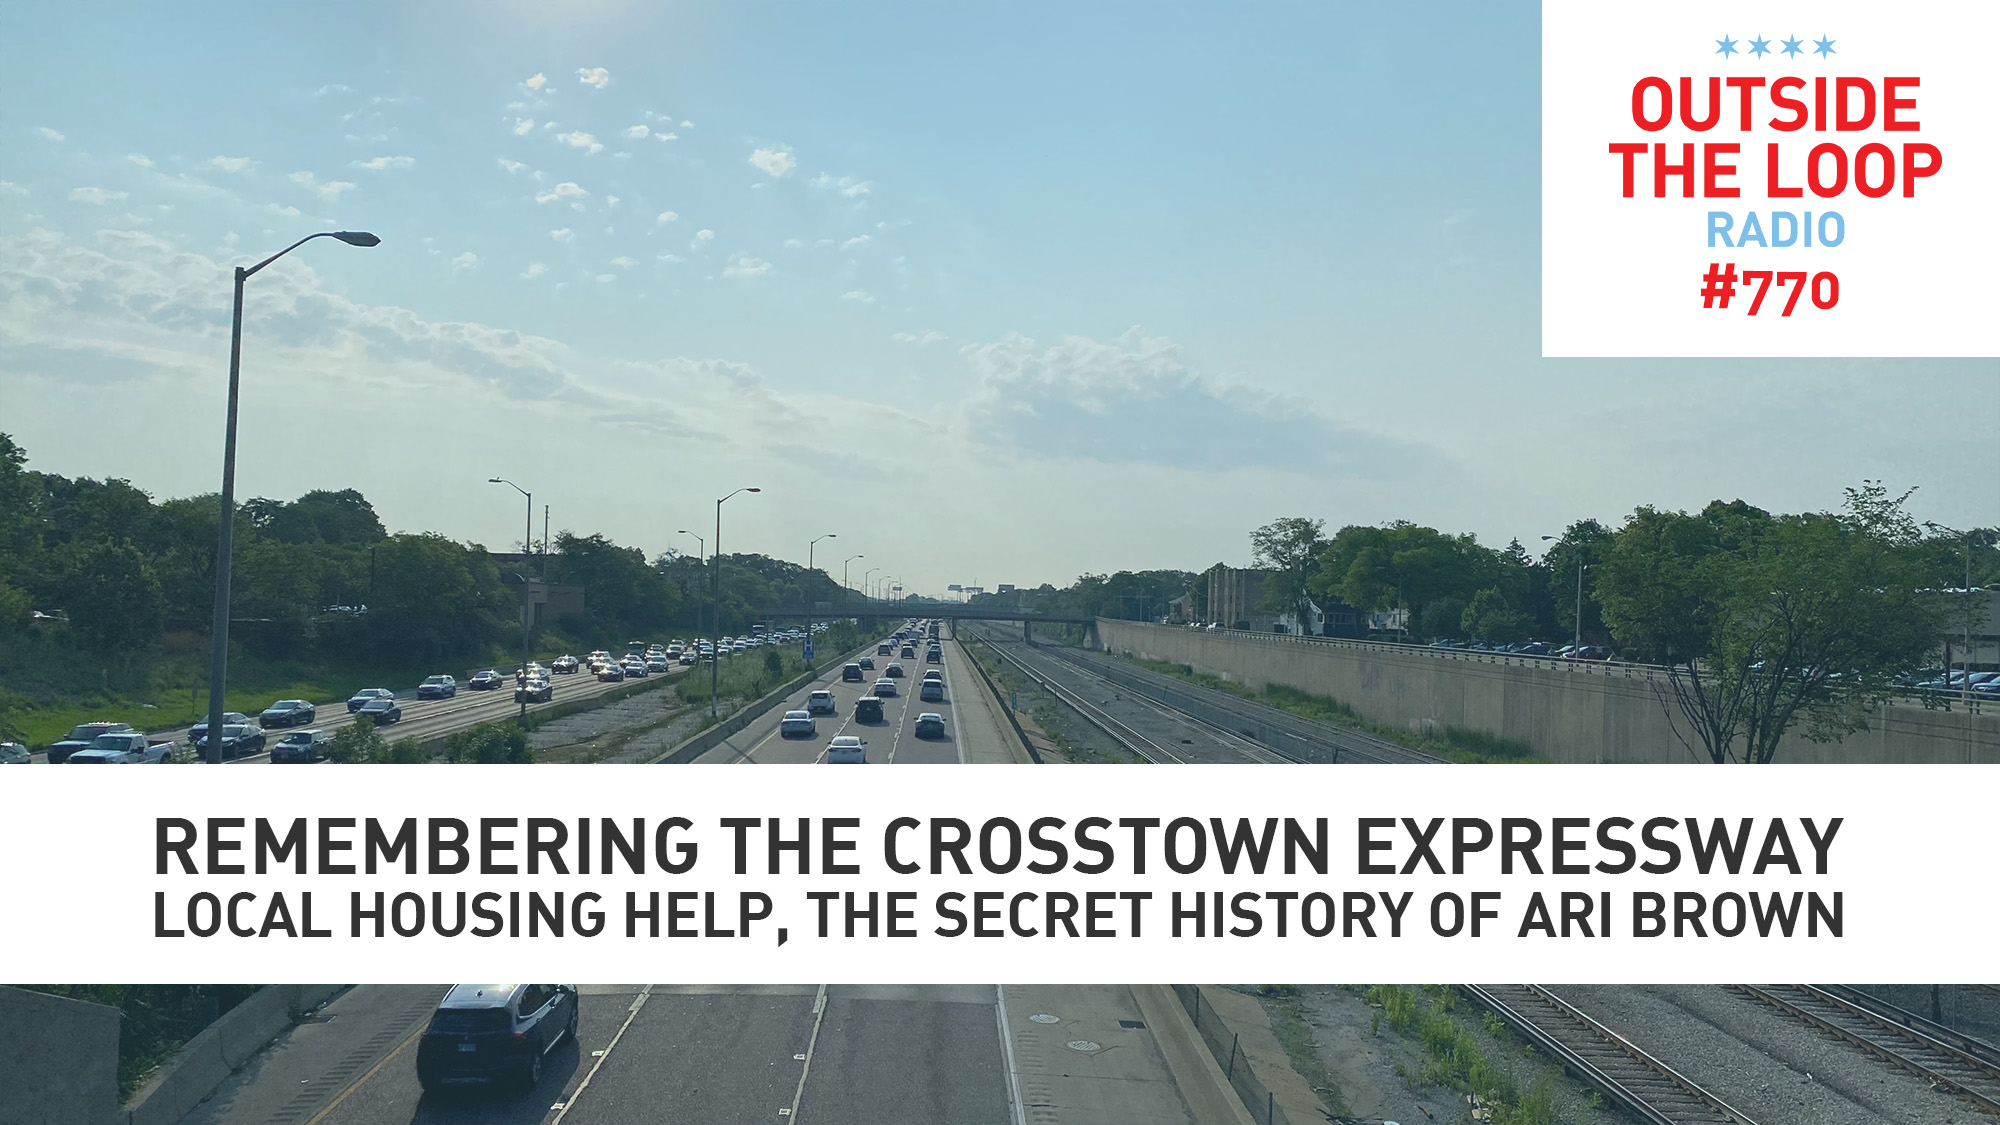 Do you remember the proposed Crosstown Expressway? (Photo credit: Mike Stephen/WGN Radio)